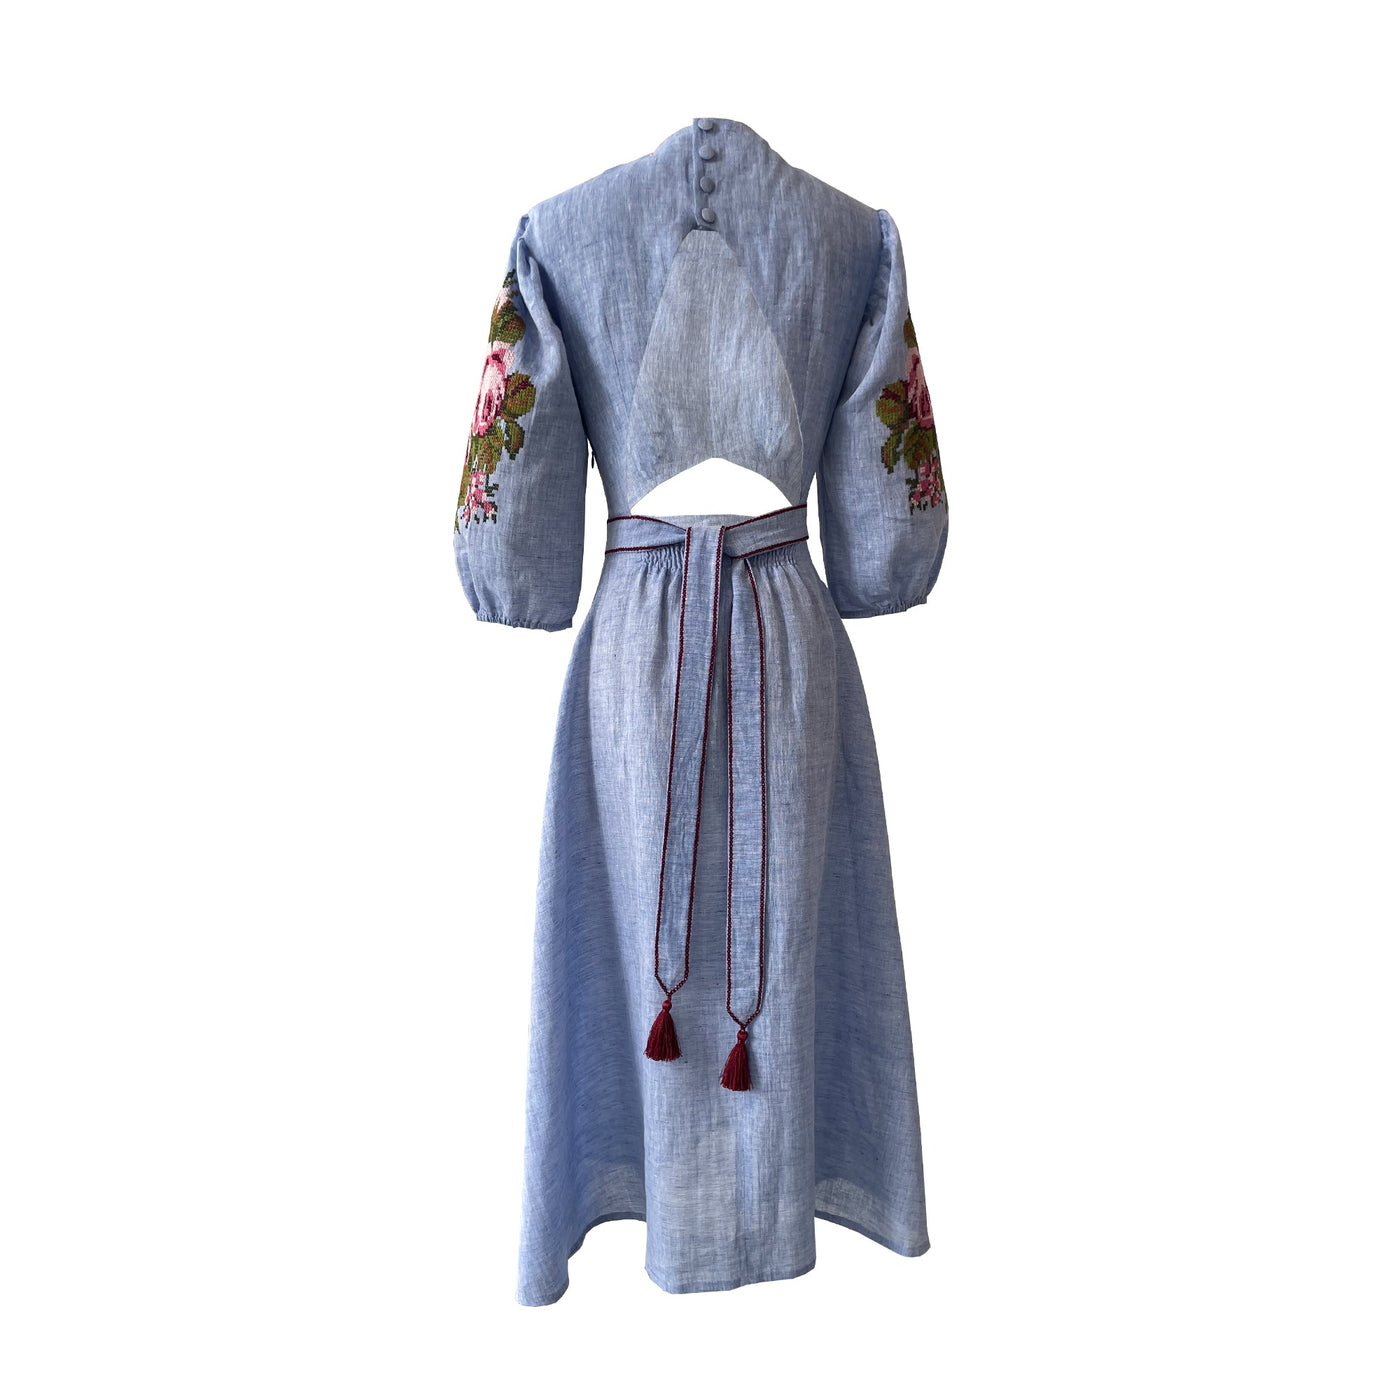 Forget-Me-Not Dress